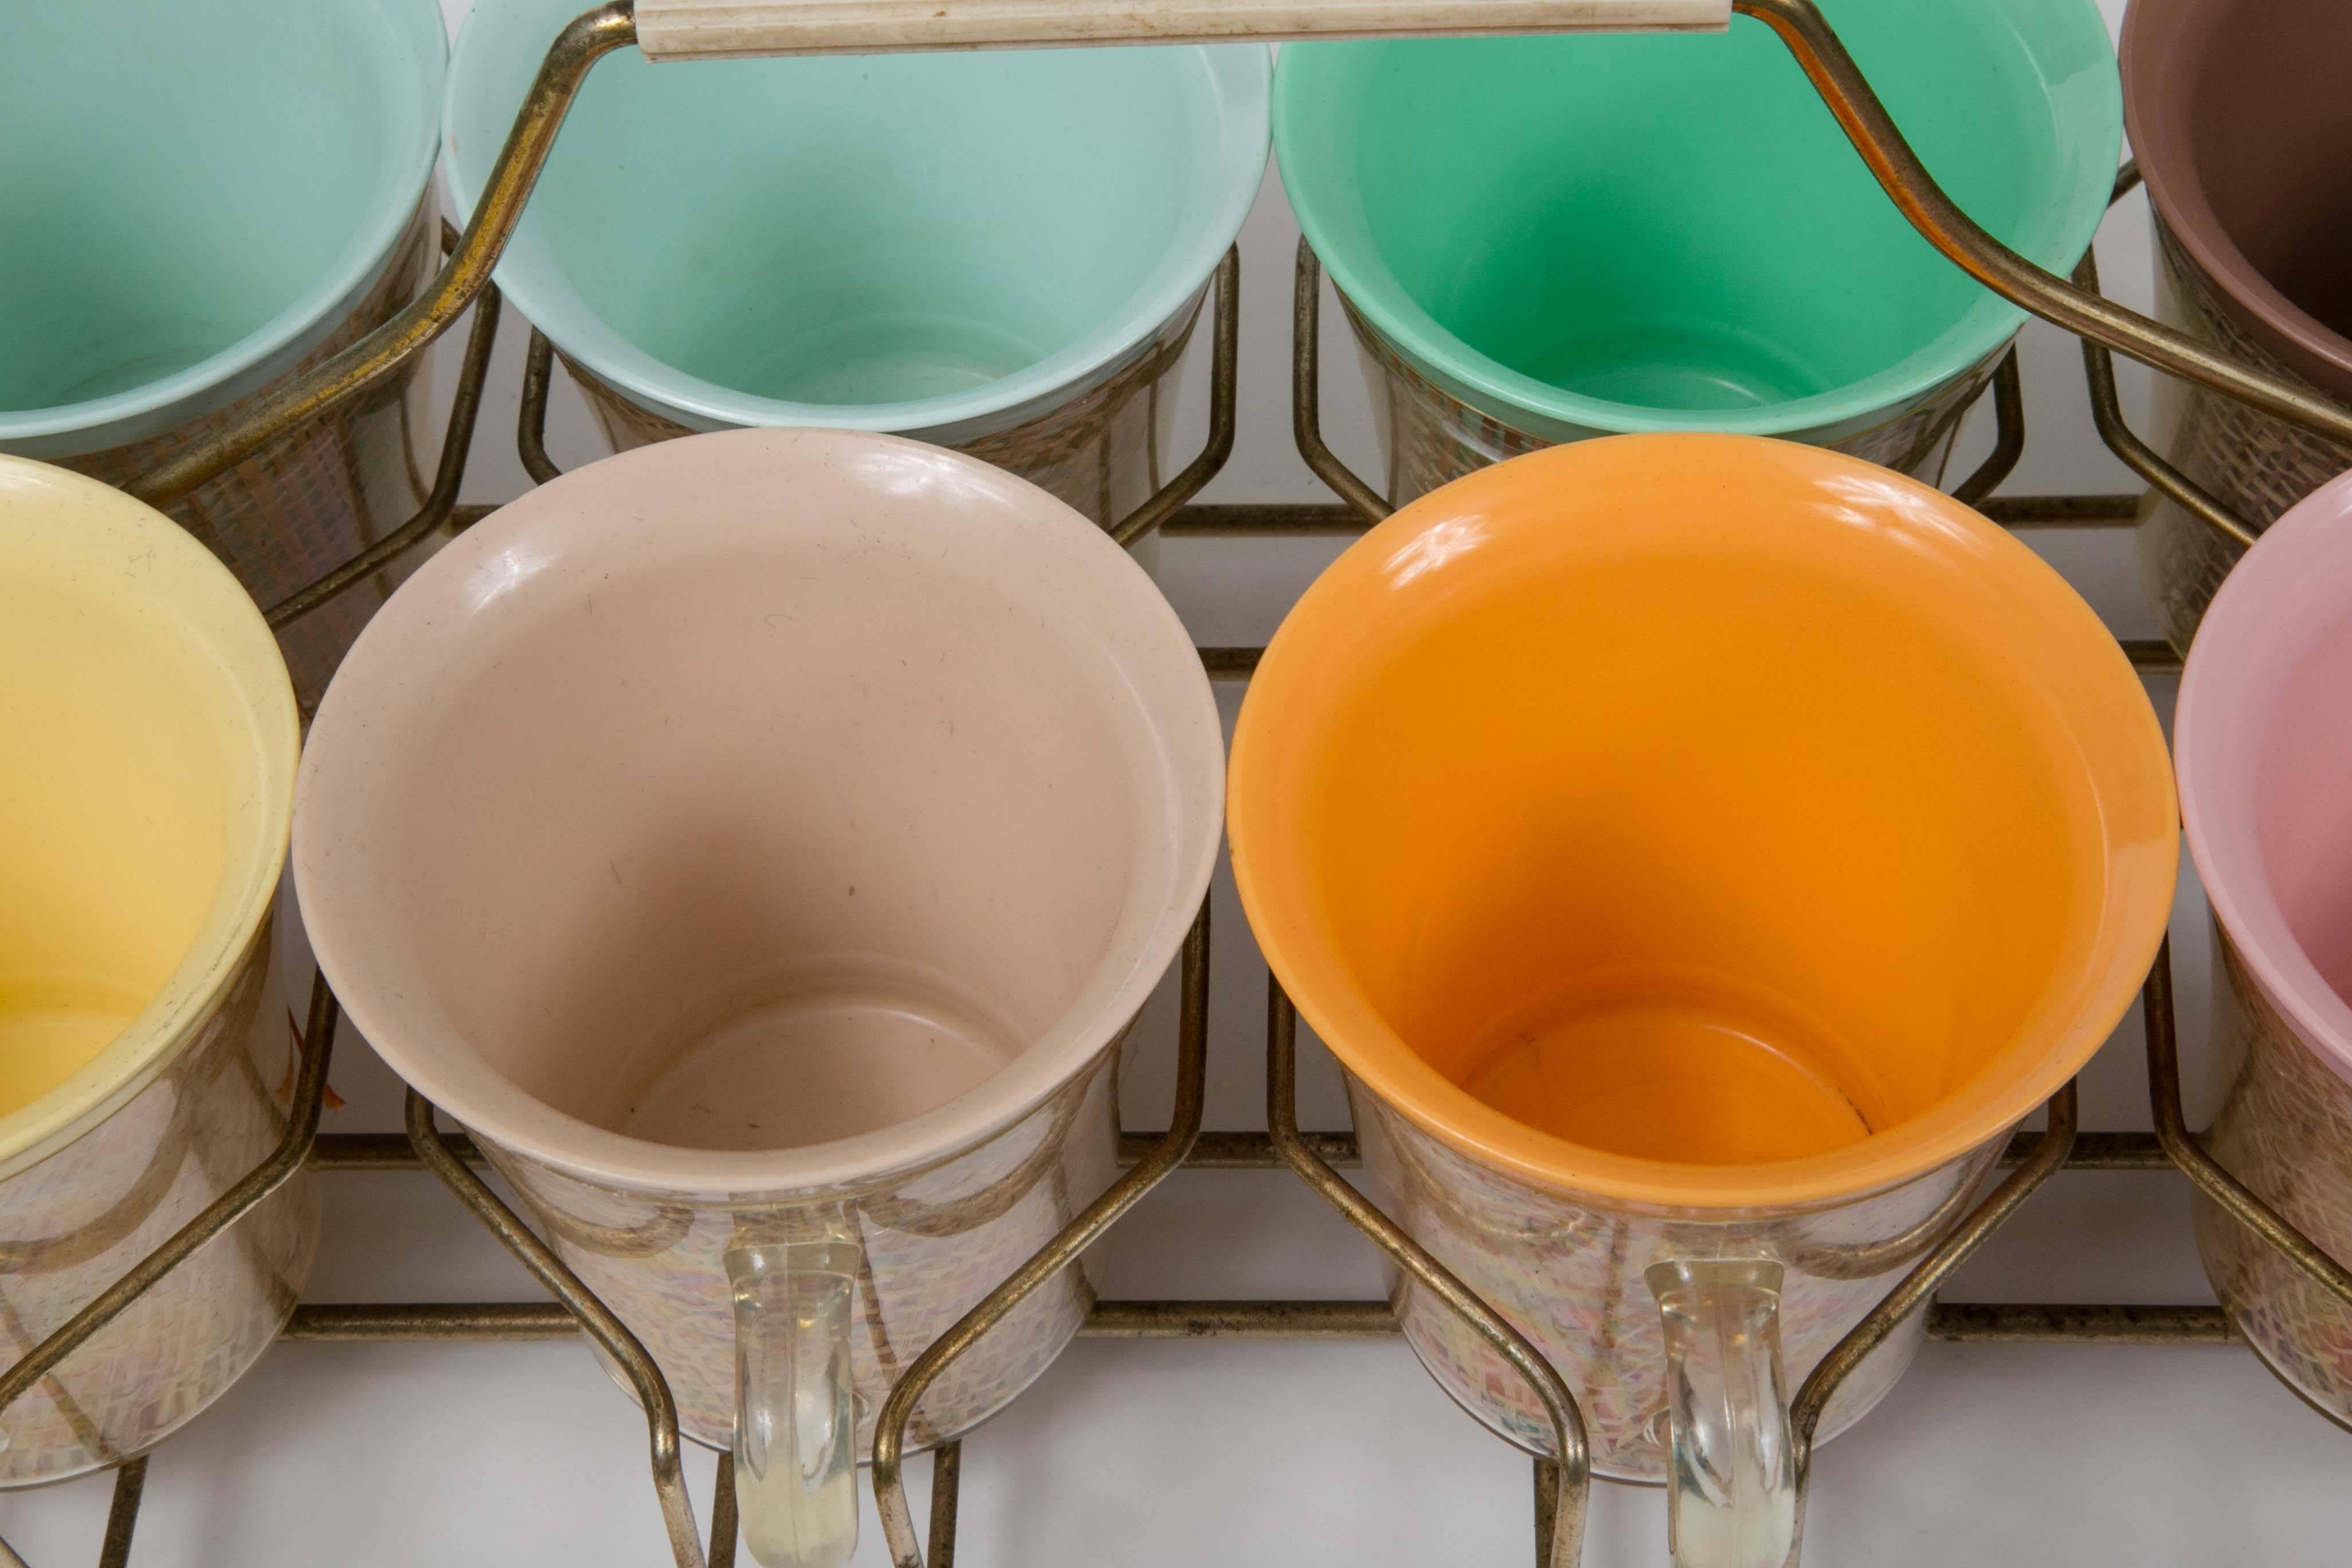 1950s Joan Cleaver style tea, coffee or sherbet cups and caddy - pastel colors. A fun set of eight, great color with basket weave cup clear handles and great pastel colors. Summer fun - anytime spunk....be unique.